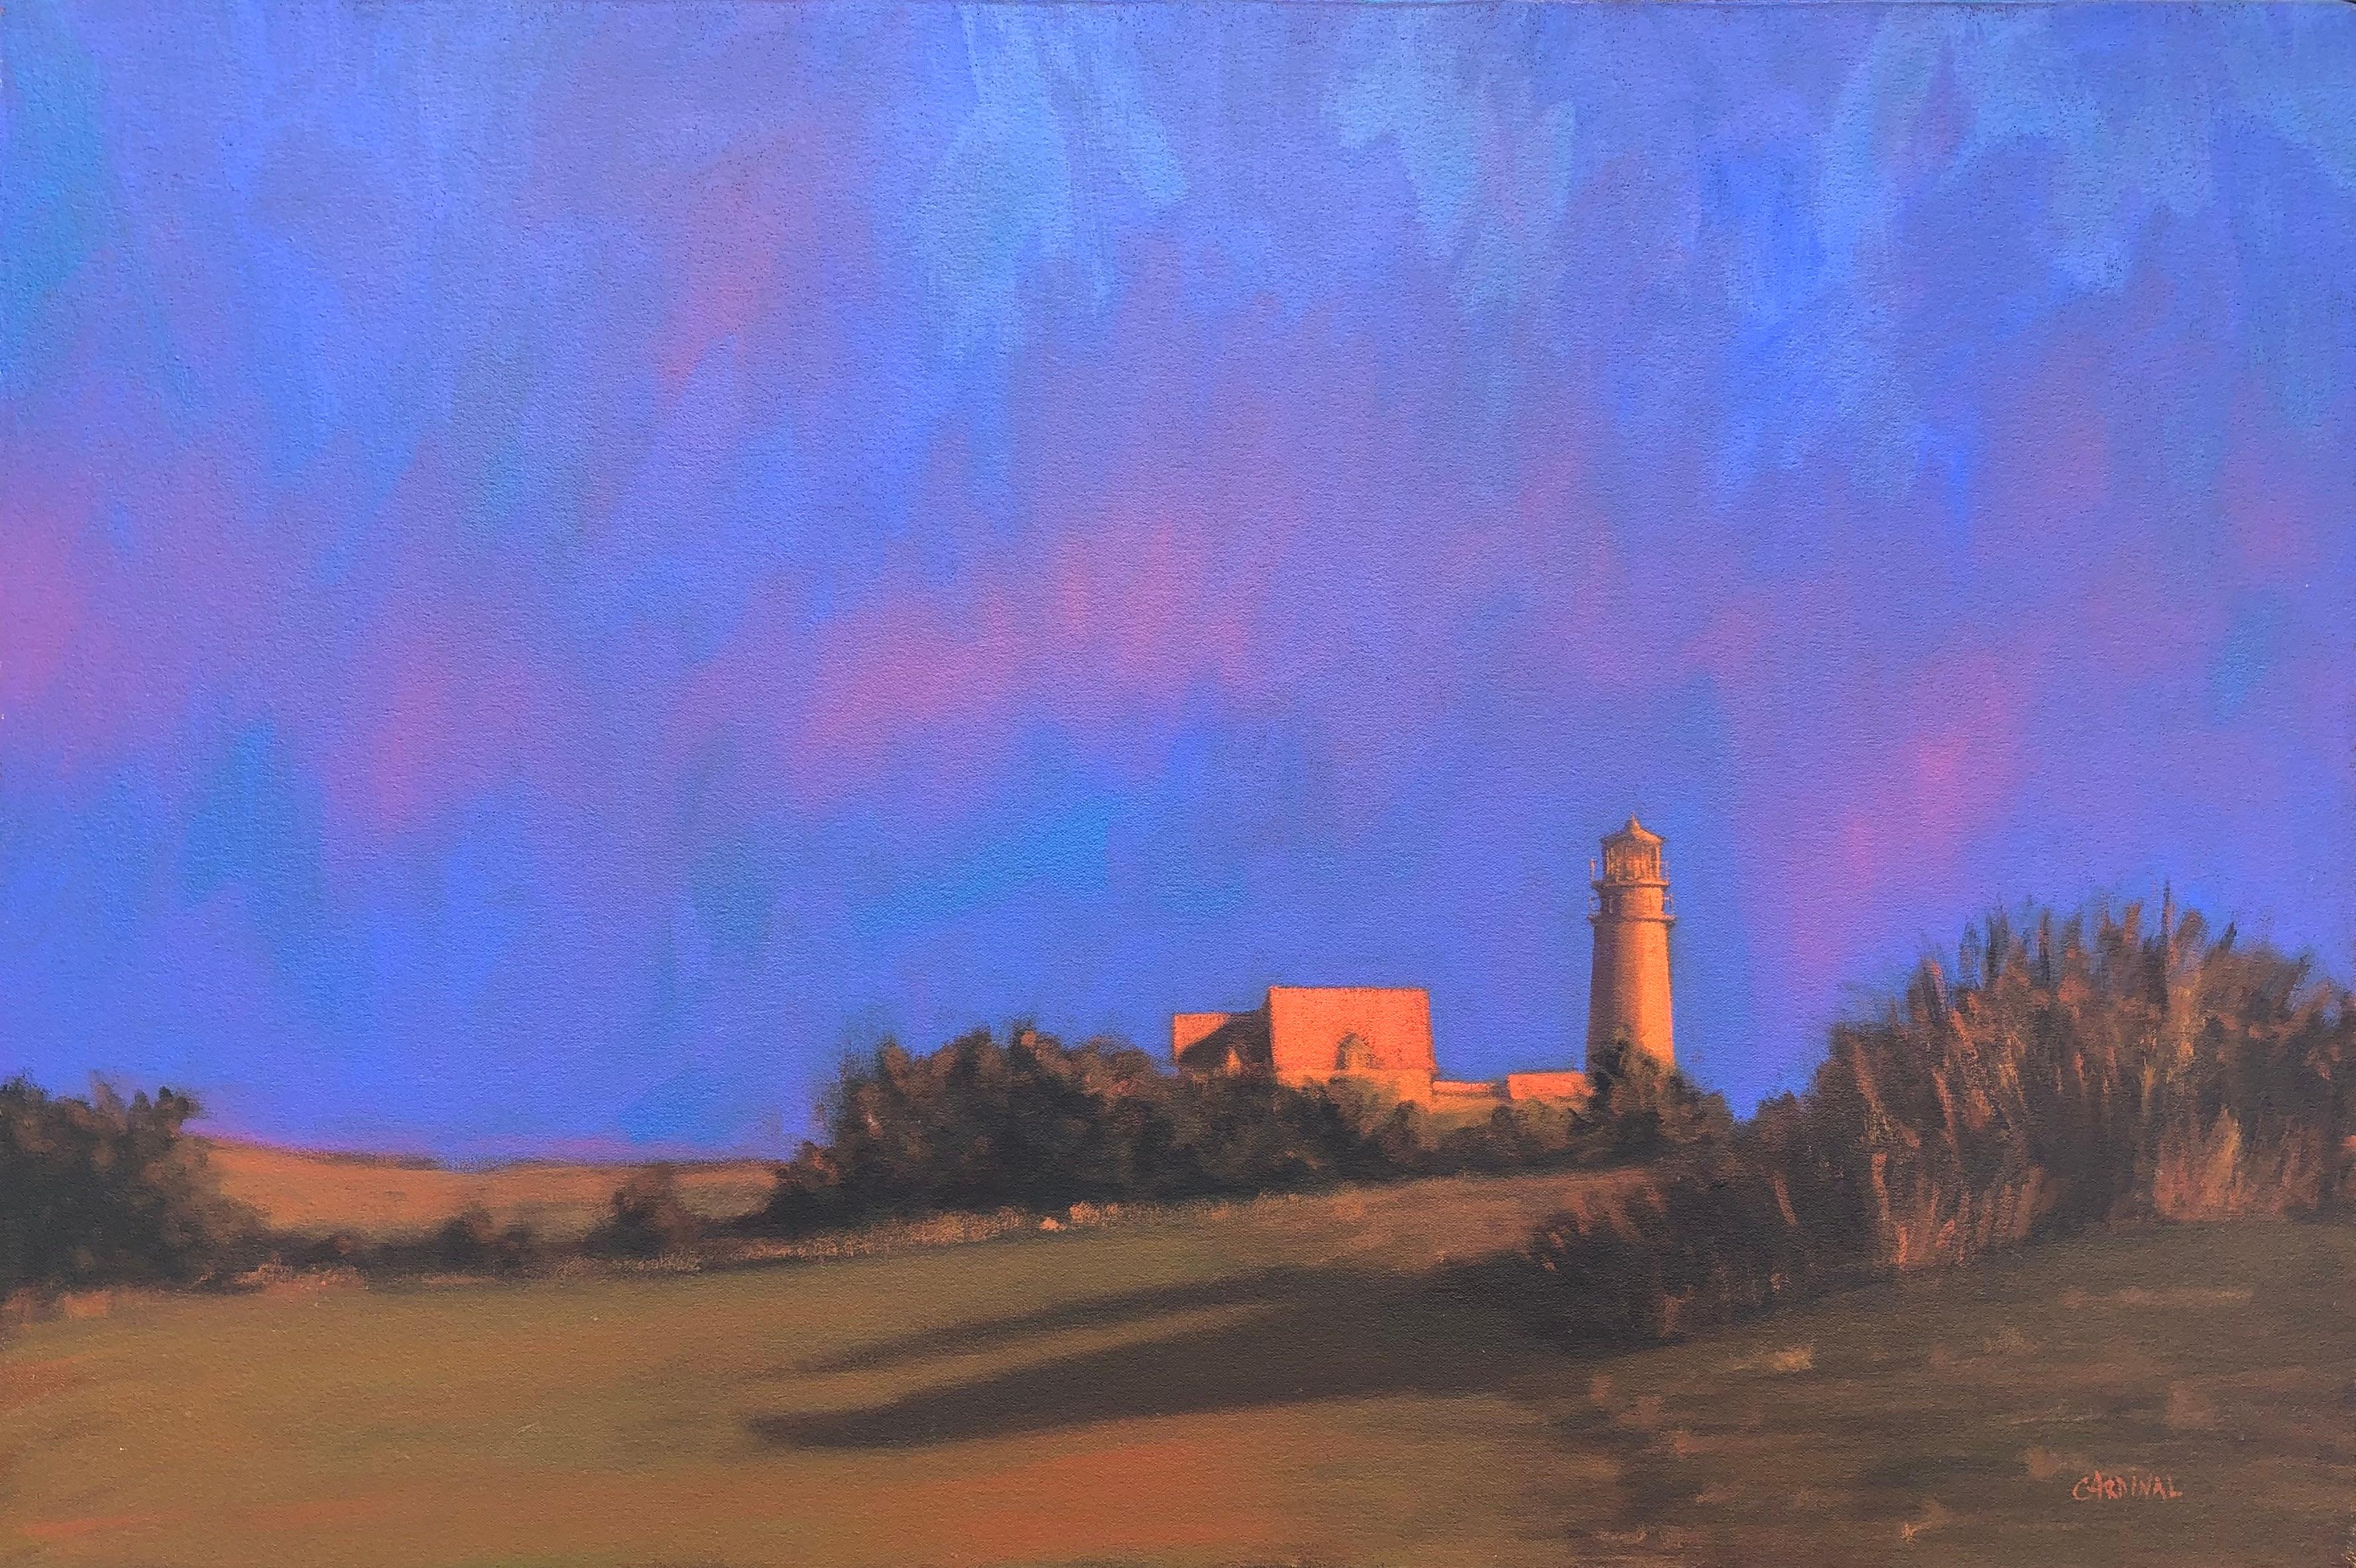 Robert Cardinal Landscape Painting - "Highland Light" oil painting of a red lighthouse with purple and red sky 